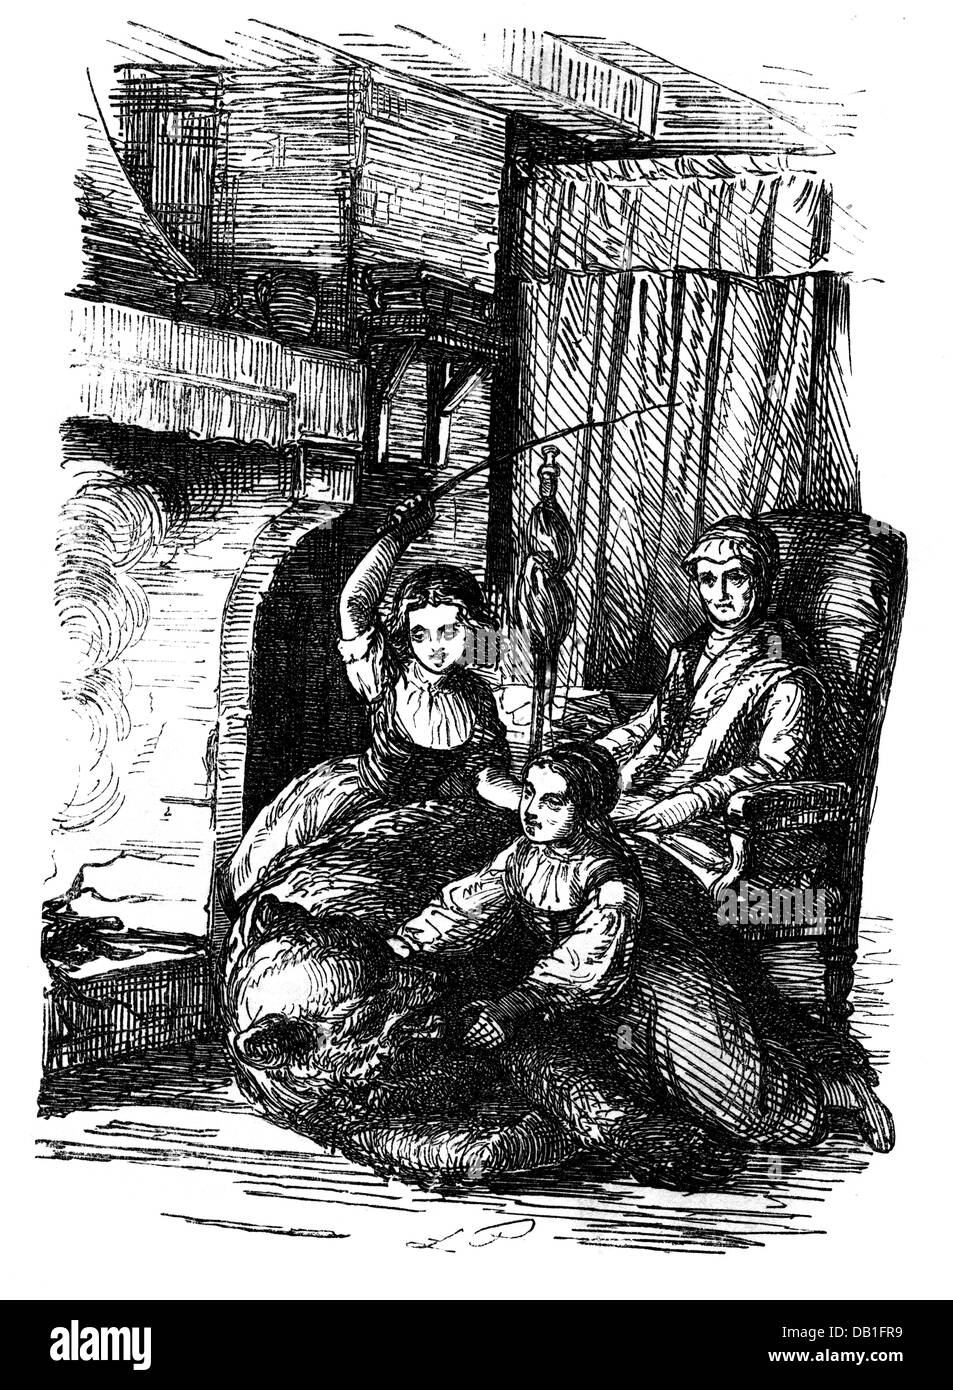 Literature Fairytale Brothers Grimm Snow White And Rose Red After Drawing By Ludwig Pietsch 14 1911 Wood Engraving 1858 From Kinder Und Hausmarchen Additional Rights Clearences Not Available Stock Photo Alamy